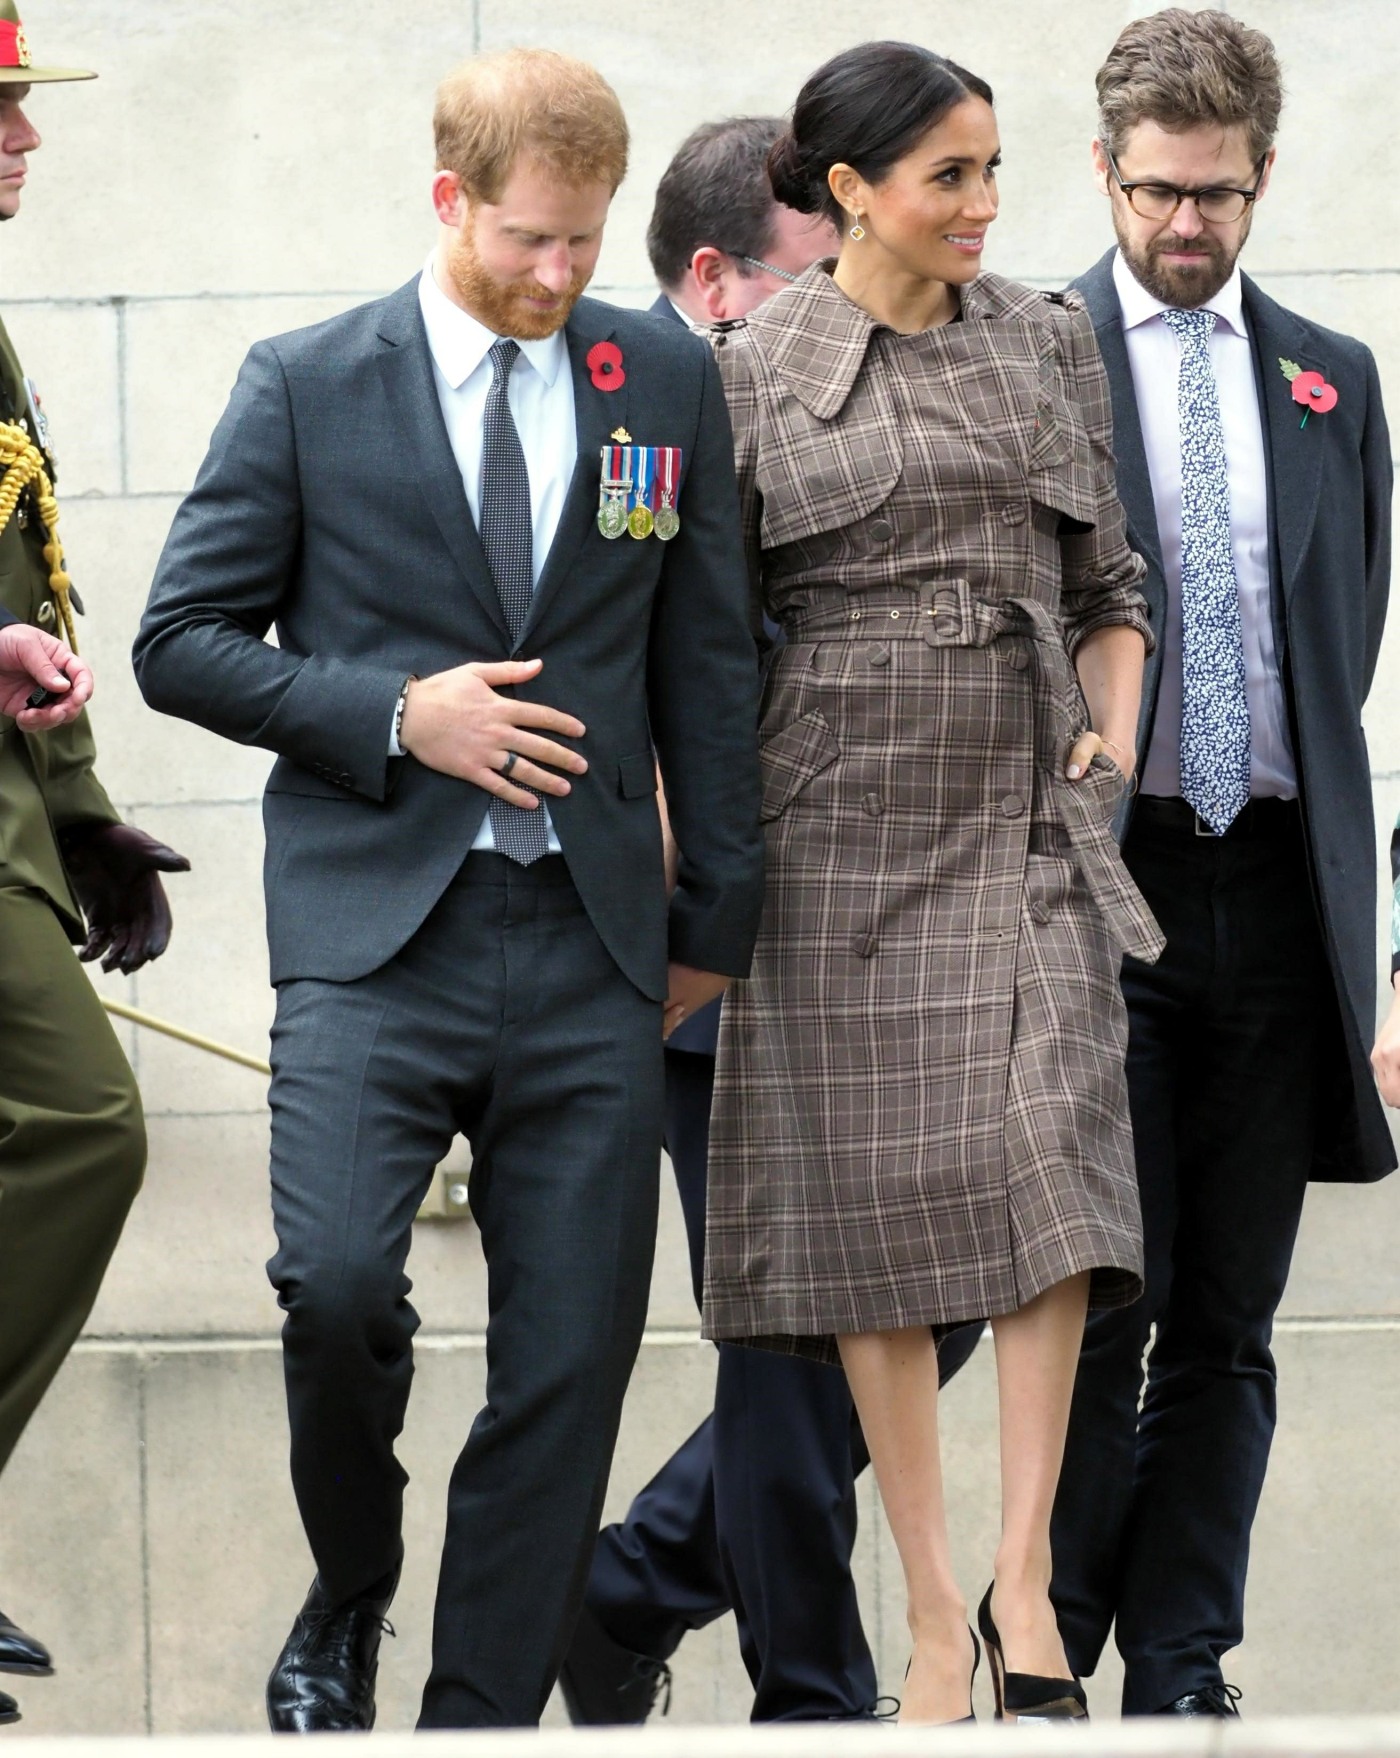 Duke and Duchess os Sussex arrive in New Zealand!